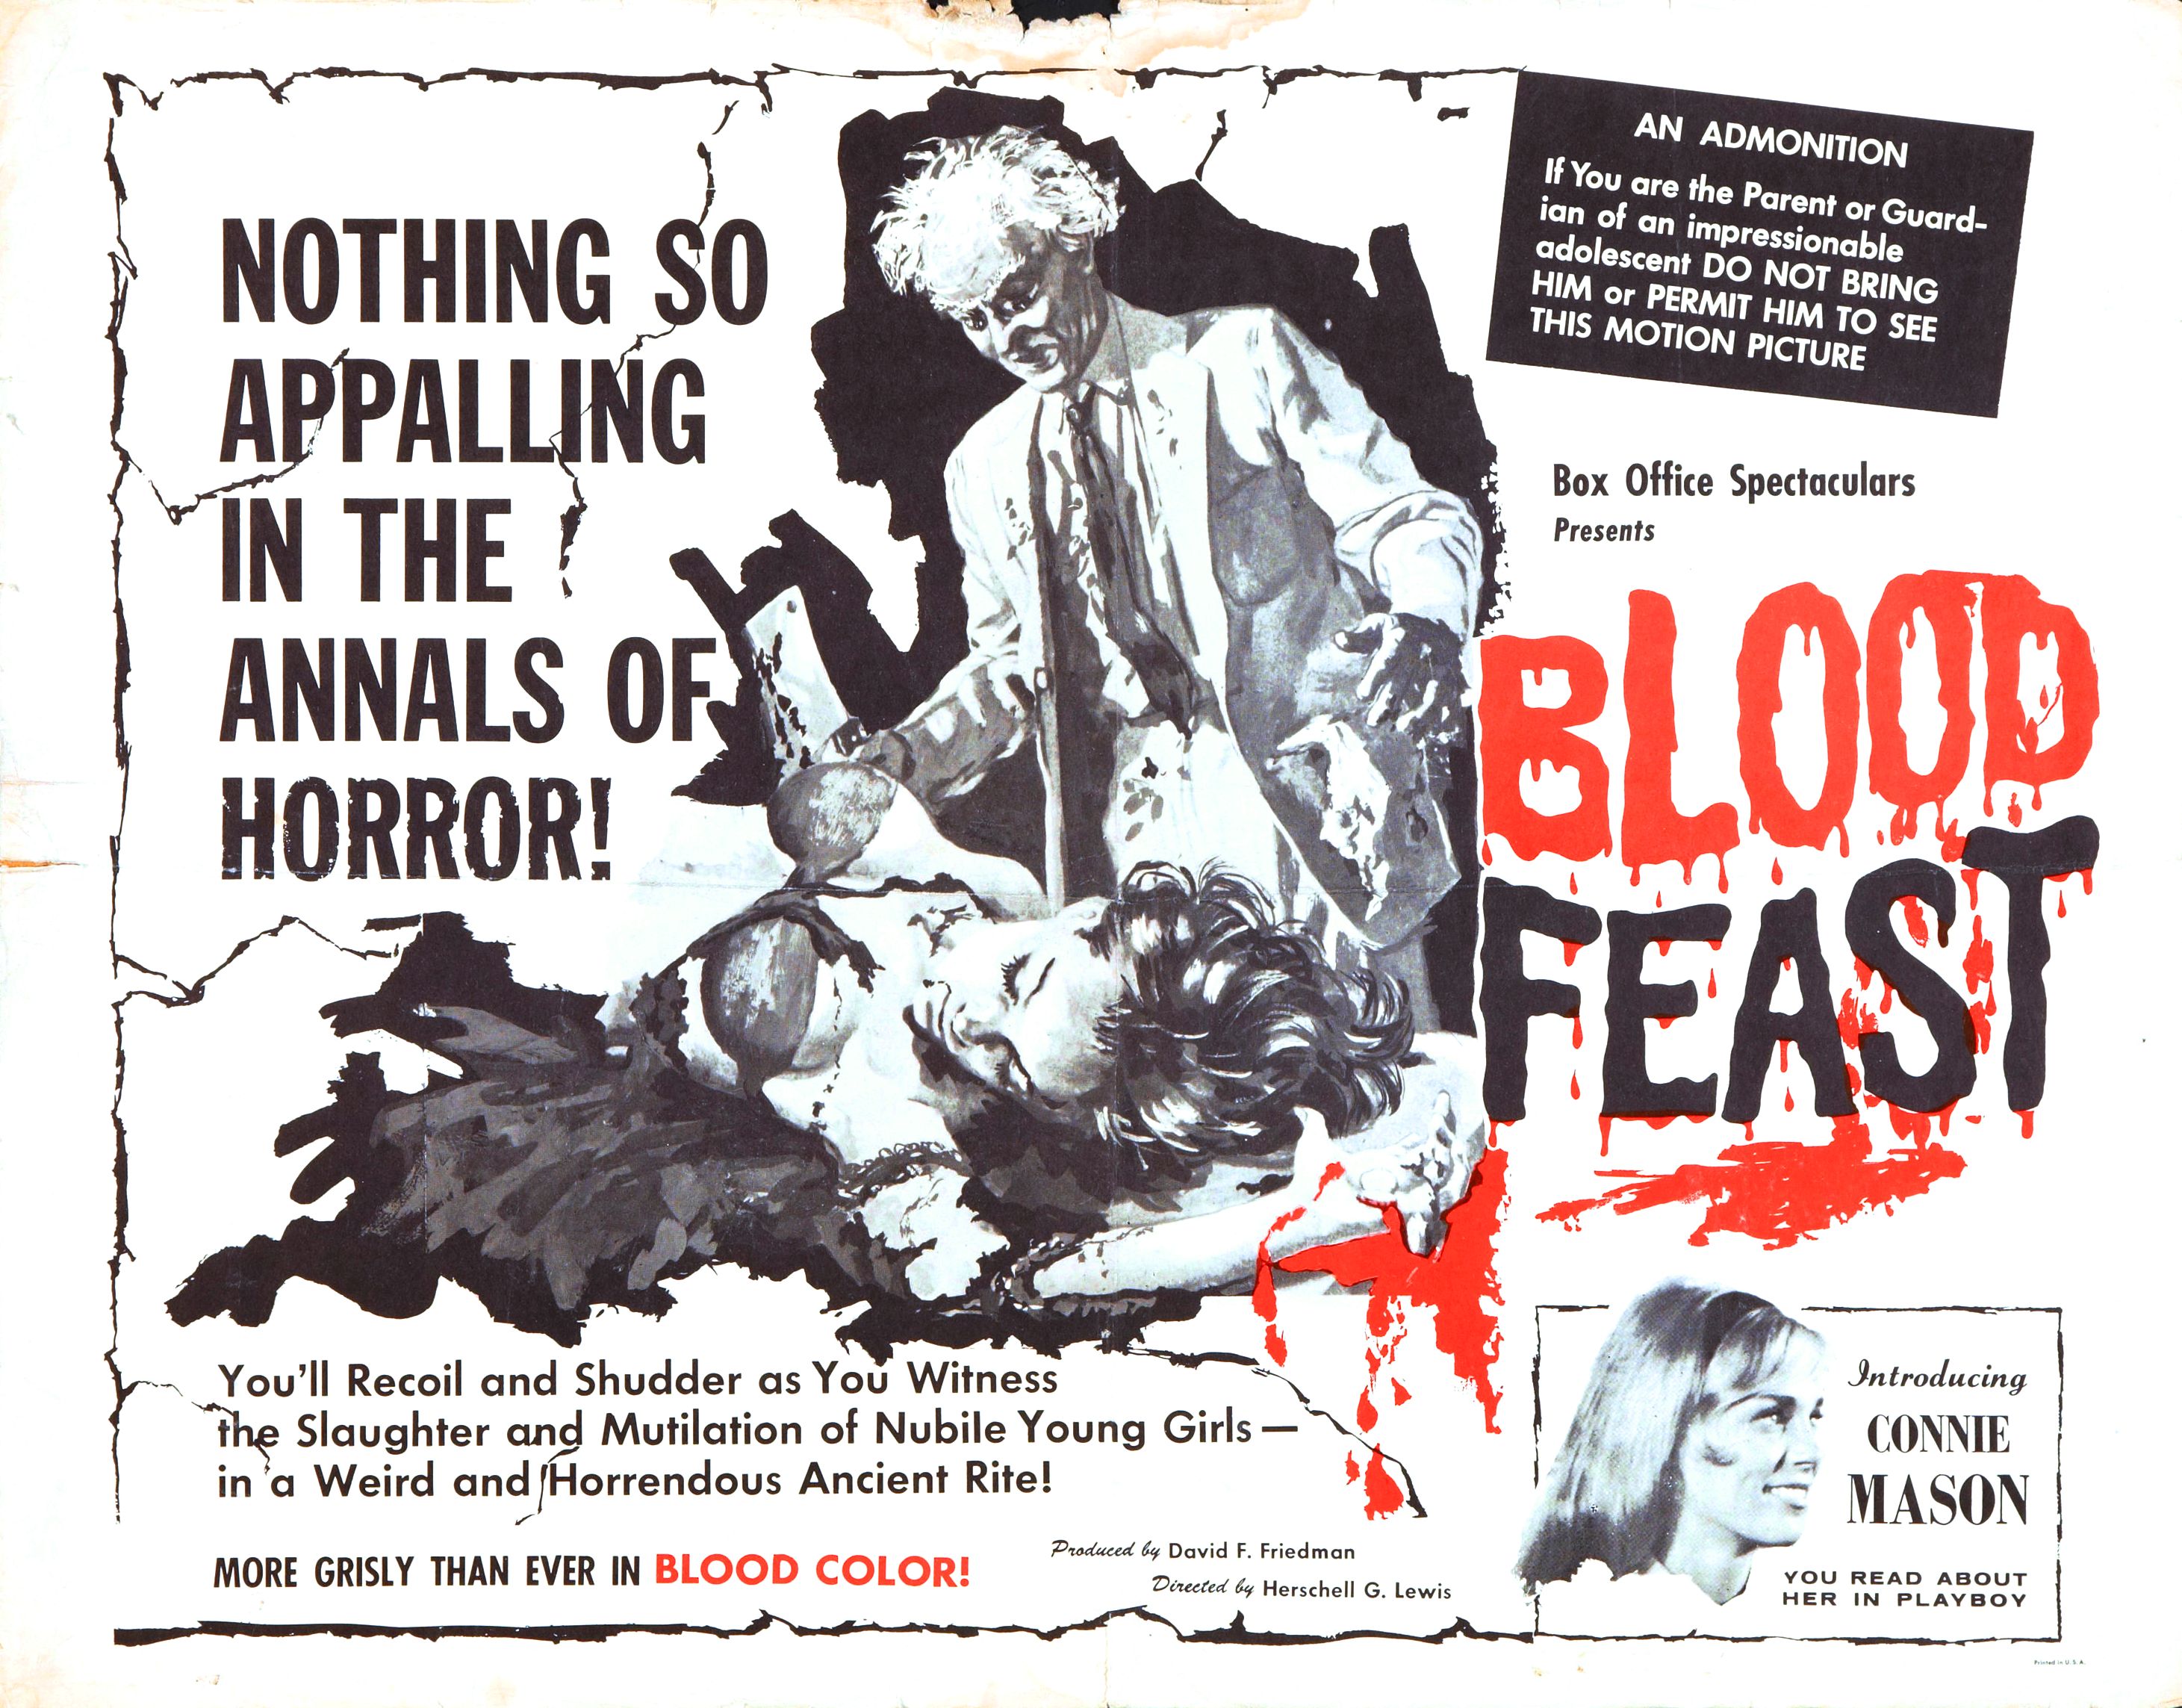 blood feast 1963 poster - An Admonition If You are the Parent or Guard ion of an impressionable adolescent Do Not Bring Him or Permit Him To See This Motion Picture Box Office Spectaculars Presents Nothing So Appalling In The Annals Of Horror! Blood Feast